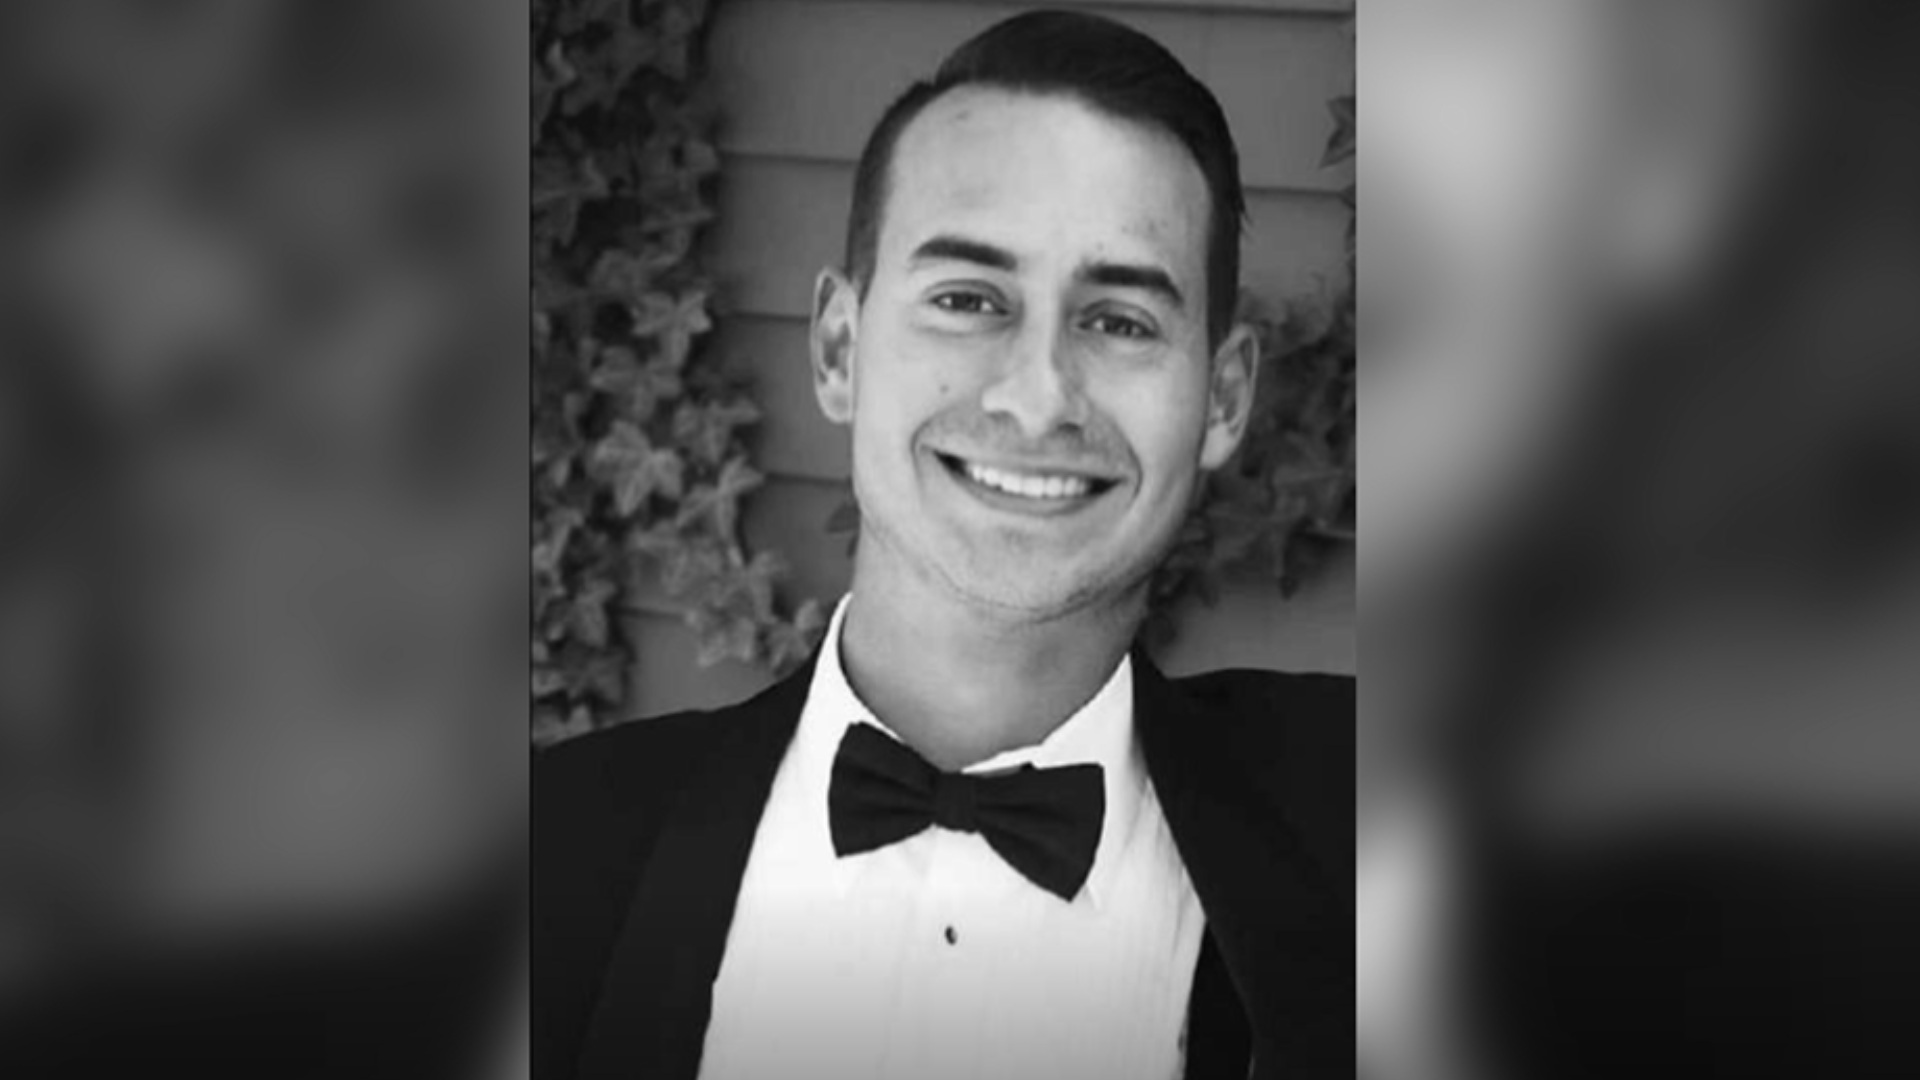 The mother of Fabrizio Stabile, the surfer who died from a brain-eating amoeba after visiting BSR Cable Park and Surf Resort, filed a lawsuit against the water park for $1 million.